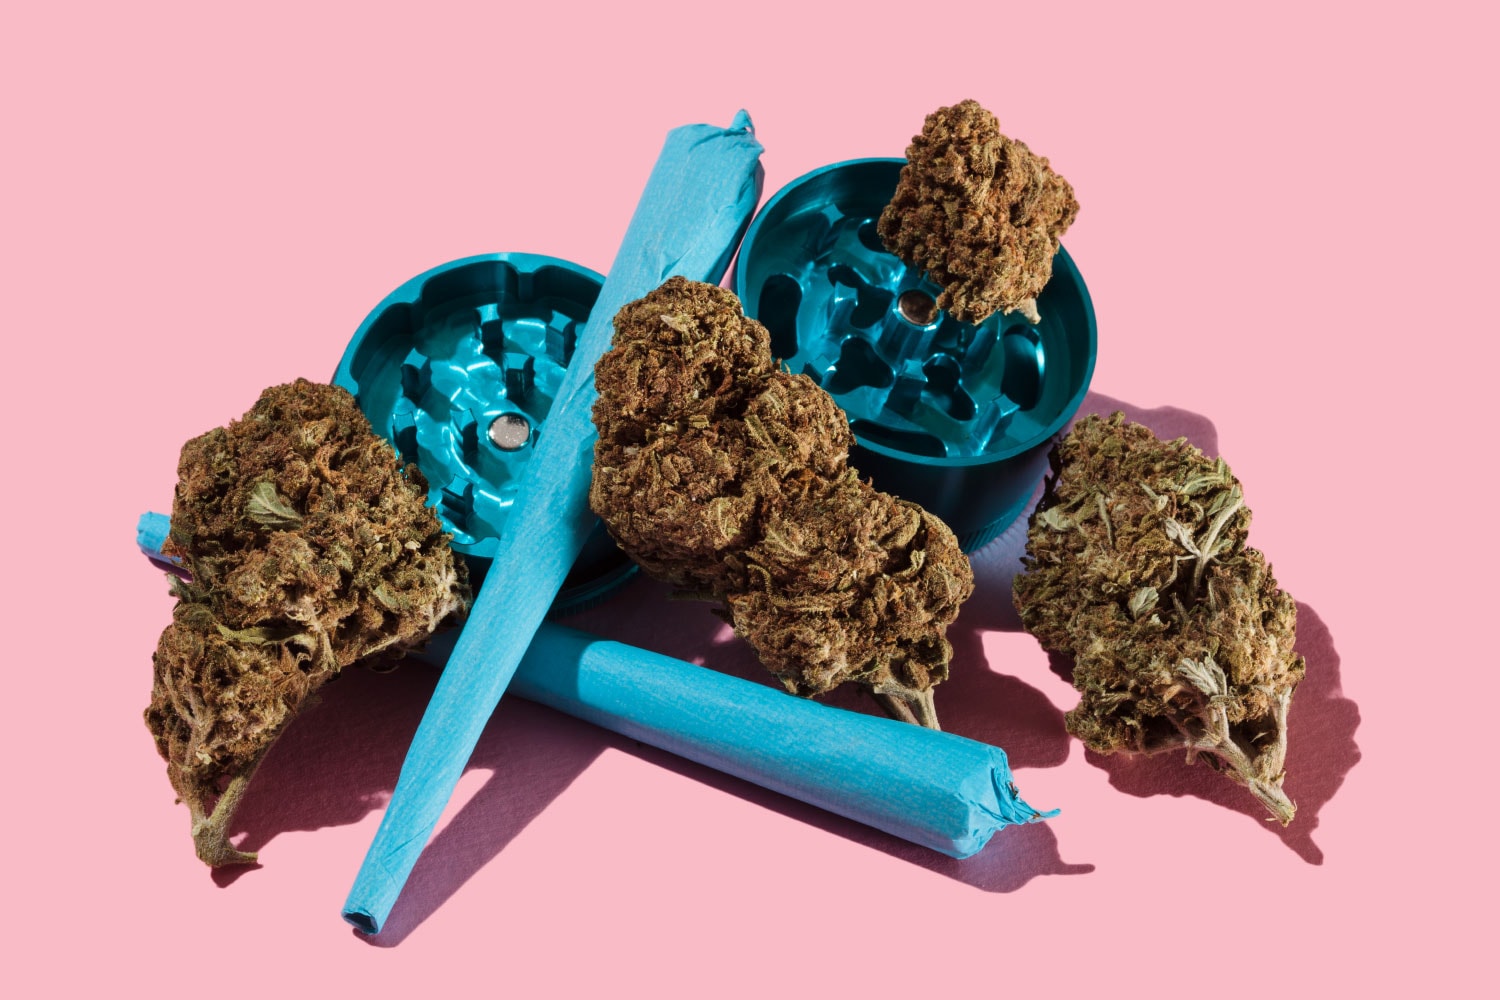 Buds, grinder and joints on pink background.